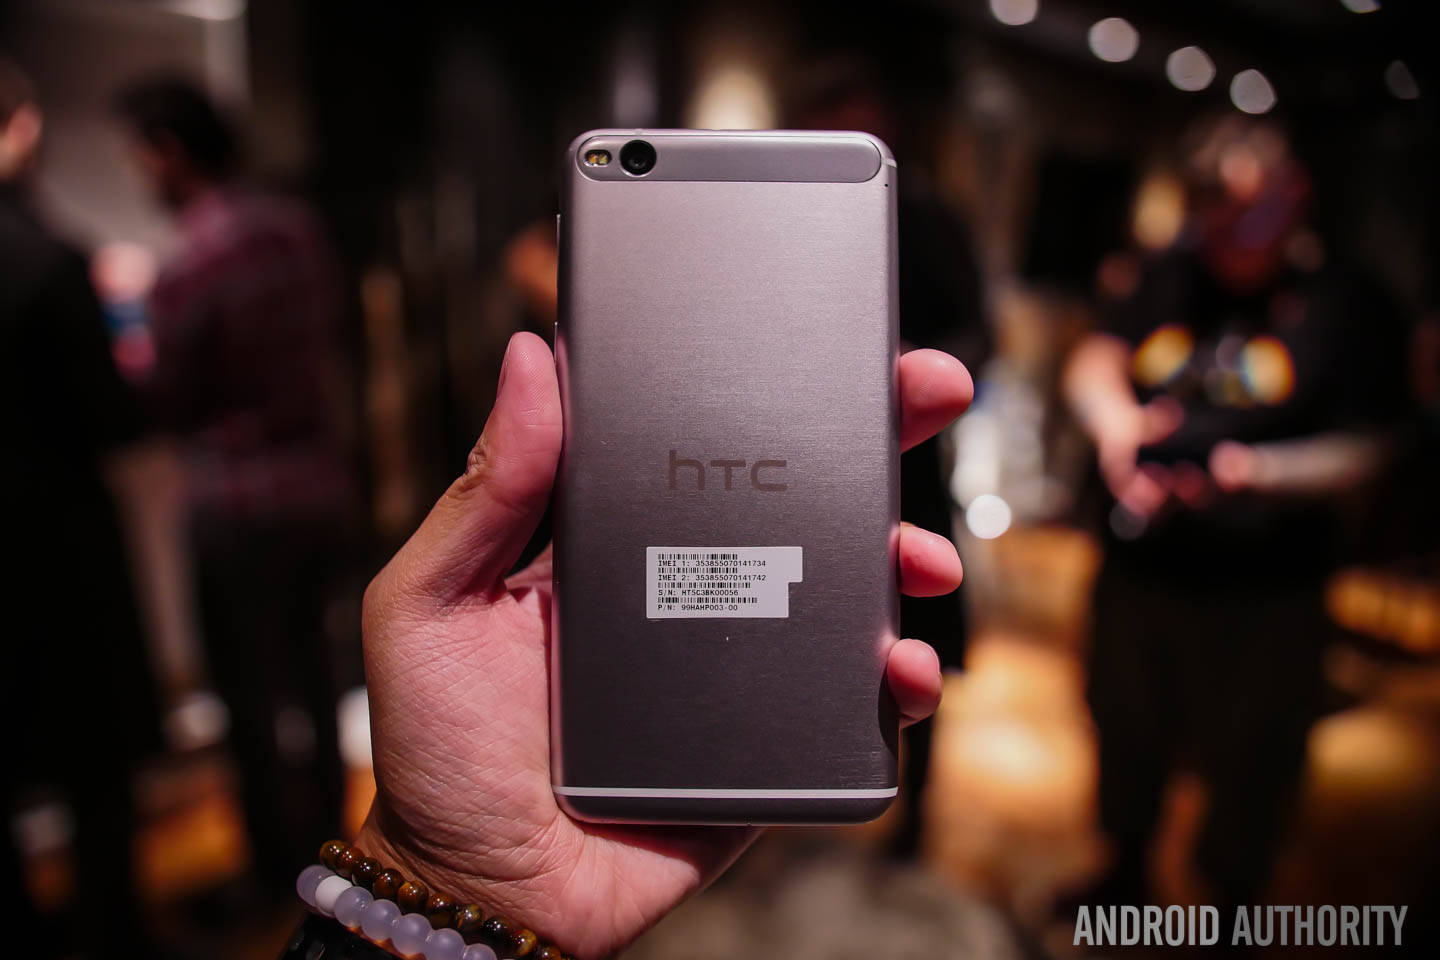 htc one x9 first look aa-4